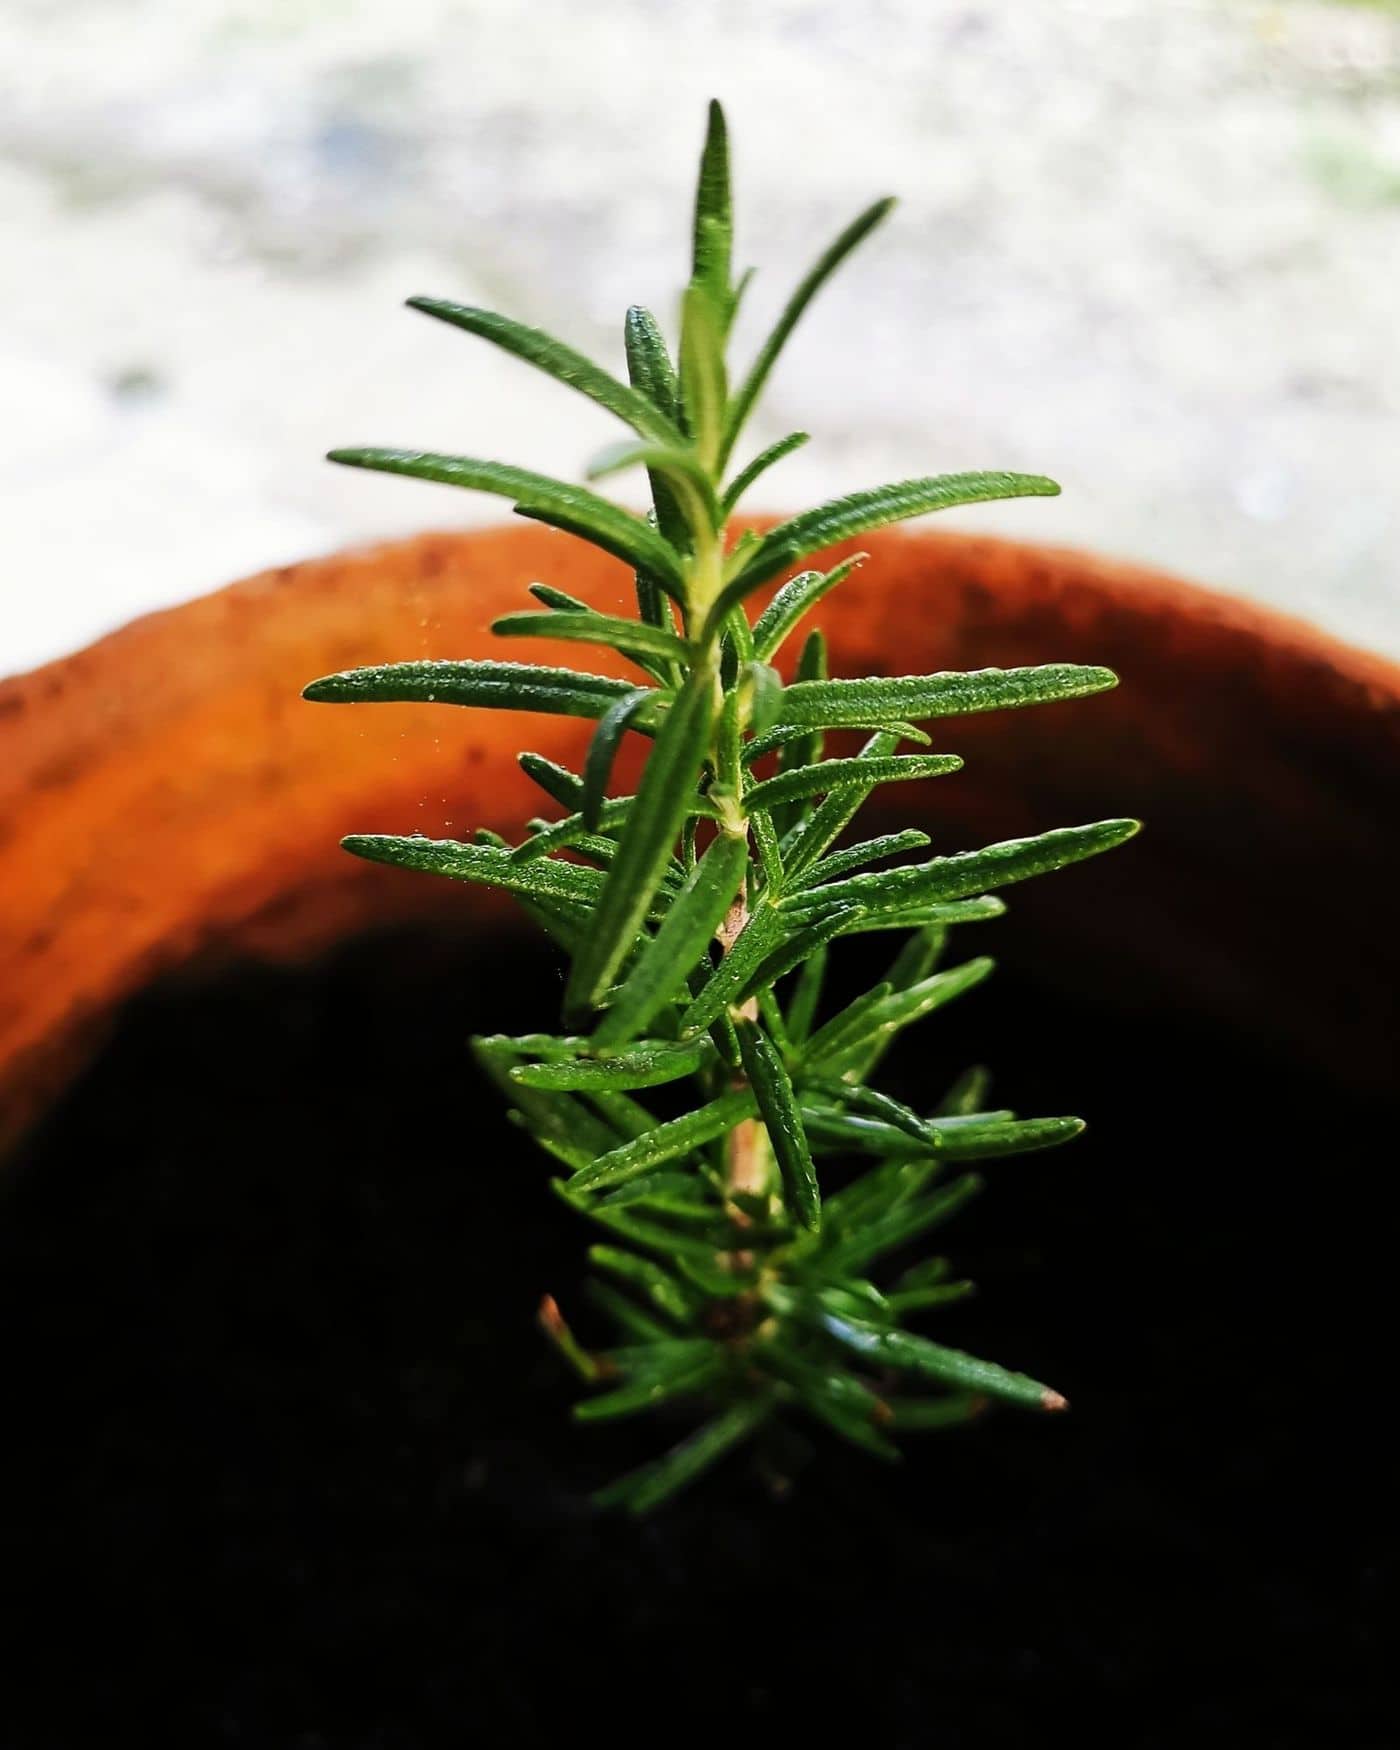 Growing a rosemary tree from a cutting